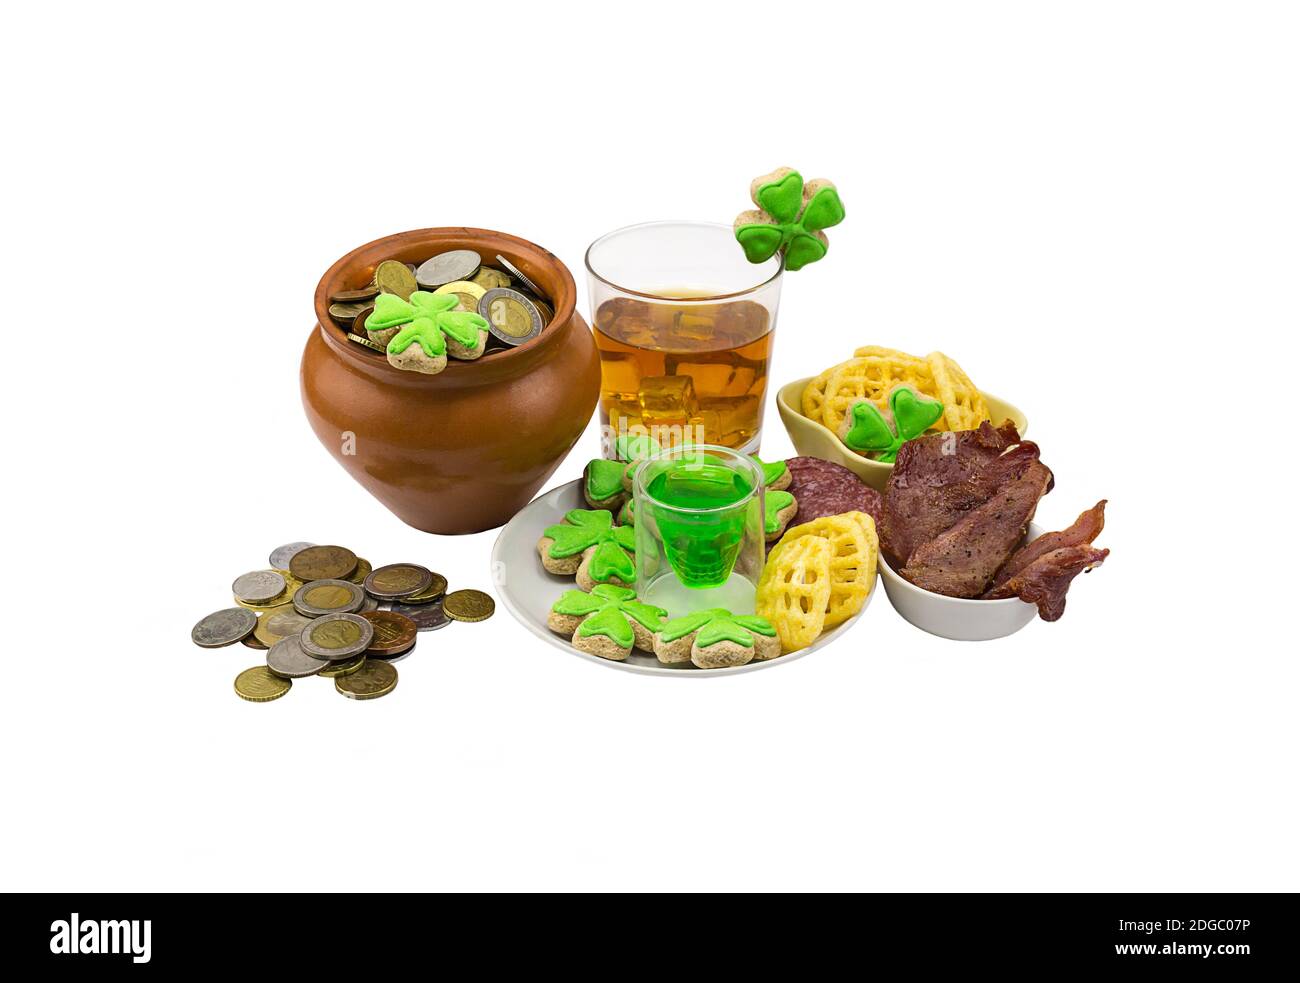 Clay pot with coins clover meat snack stack of green liquor a glass of scotch whiskey with ice. Patr Stock Photo